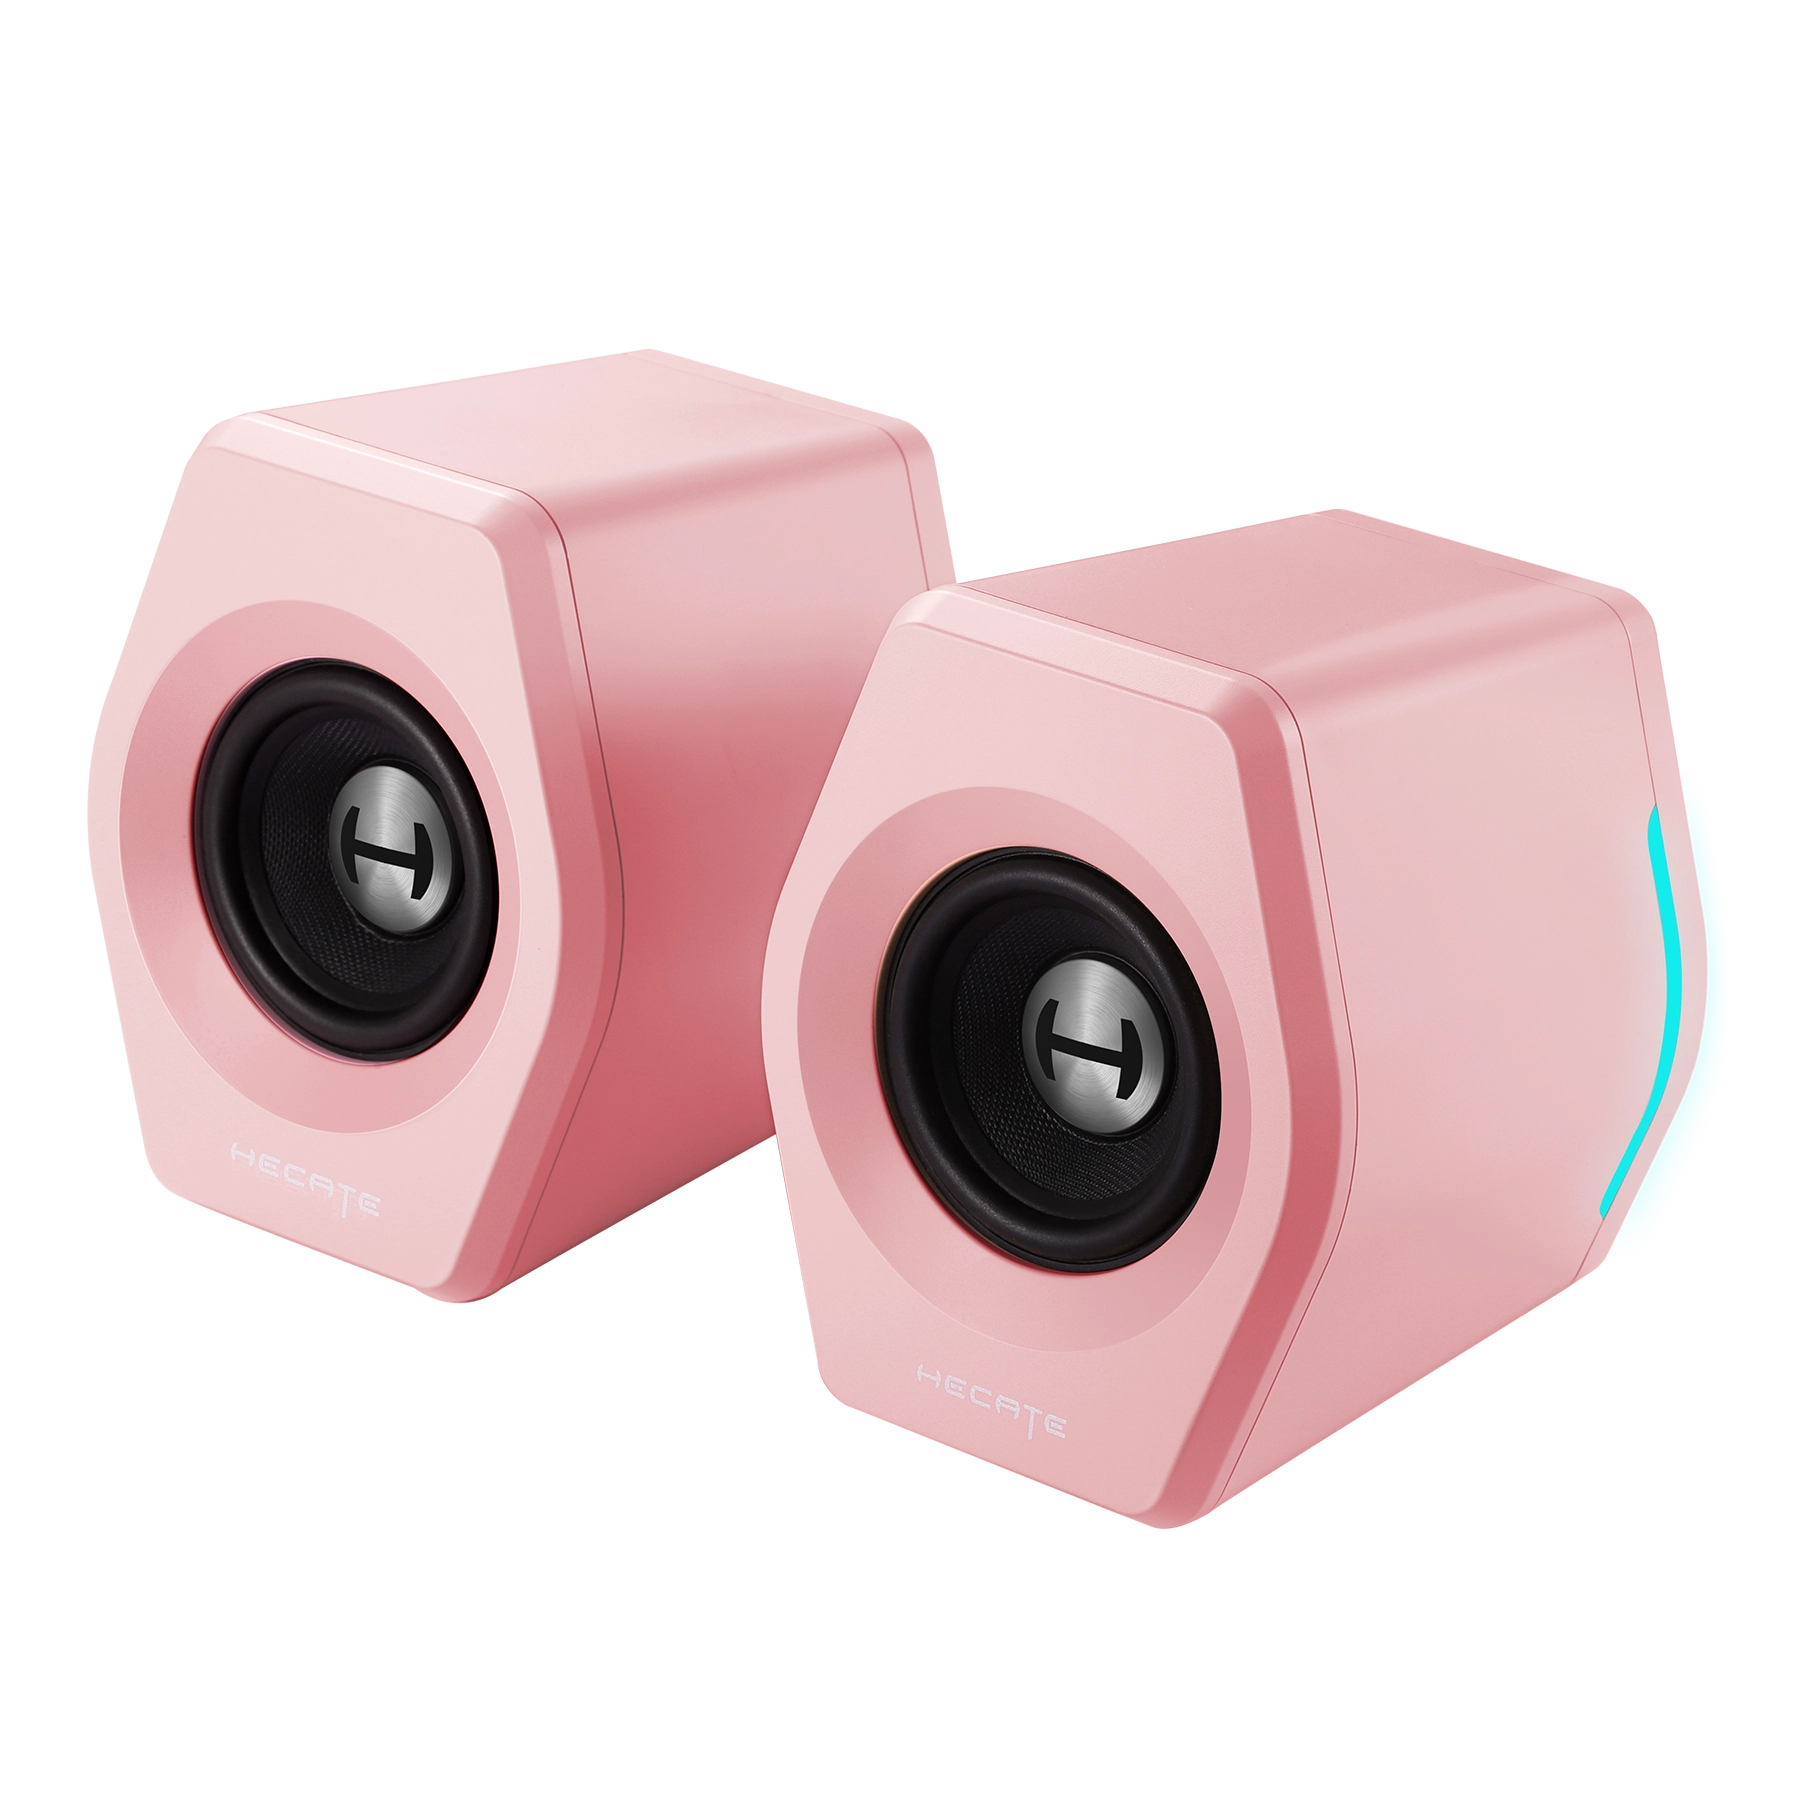 G2000 Speaker Product Picture pink_